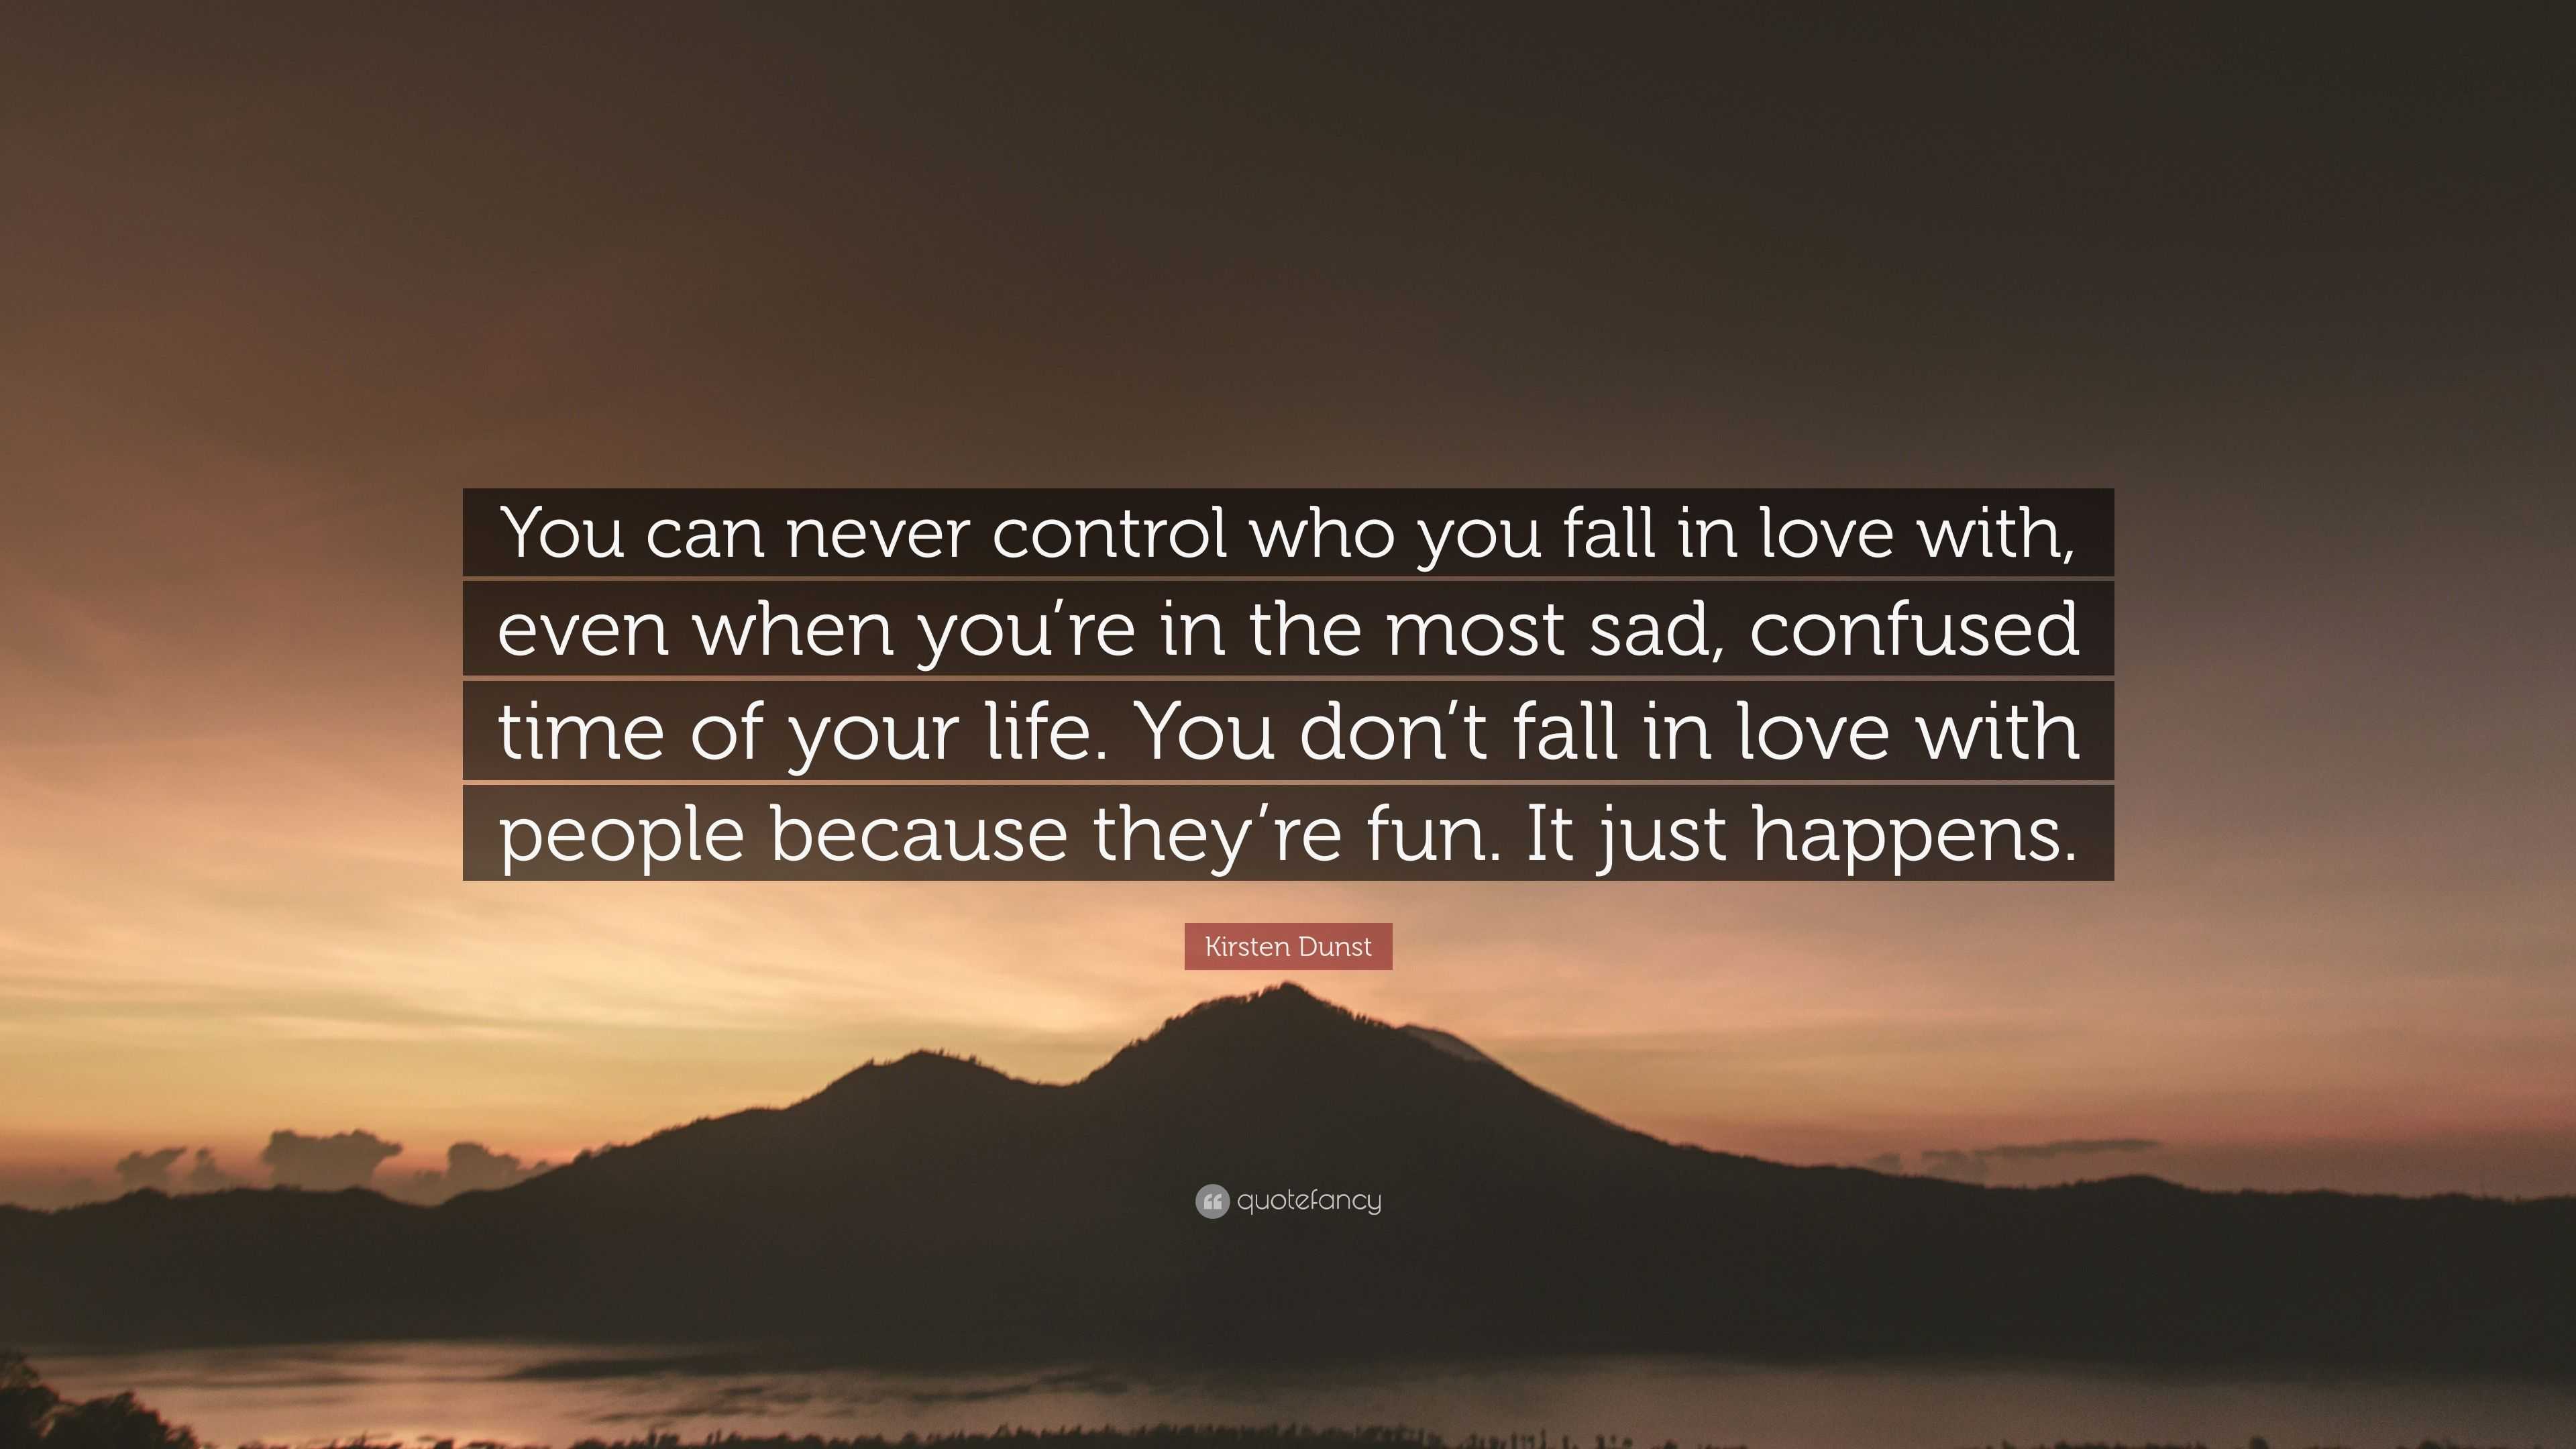 Kirsten Dunst Quote “You can never control who you fall in love with